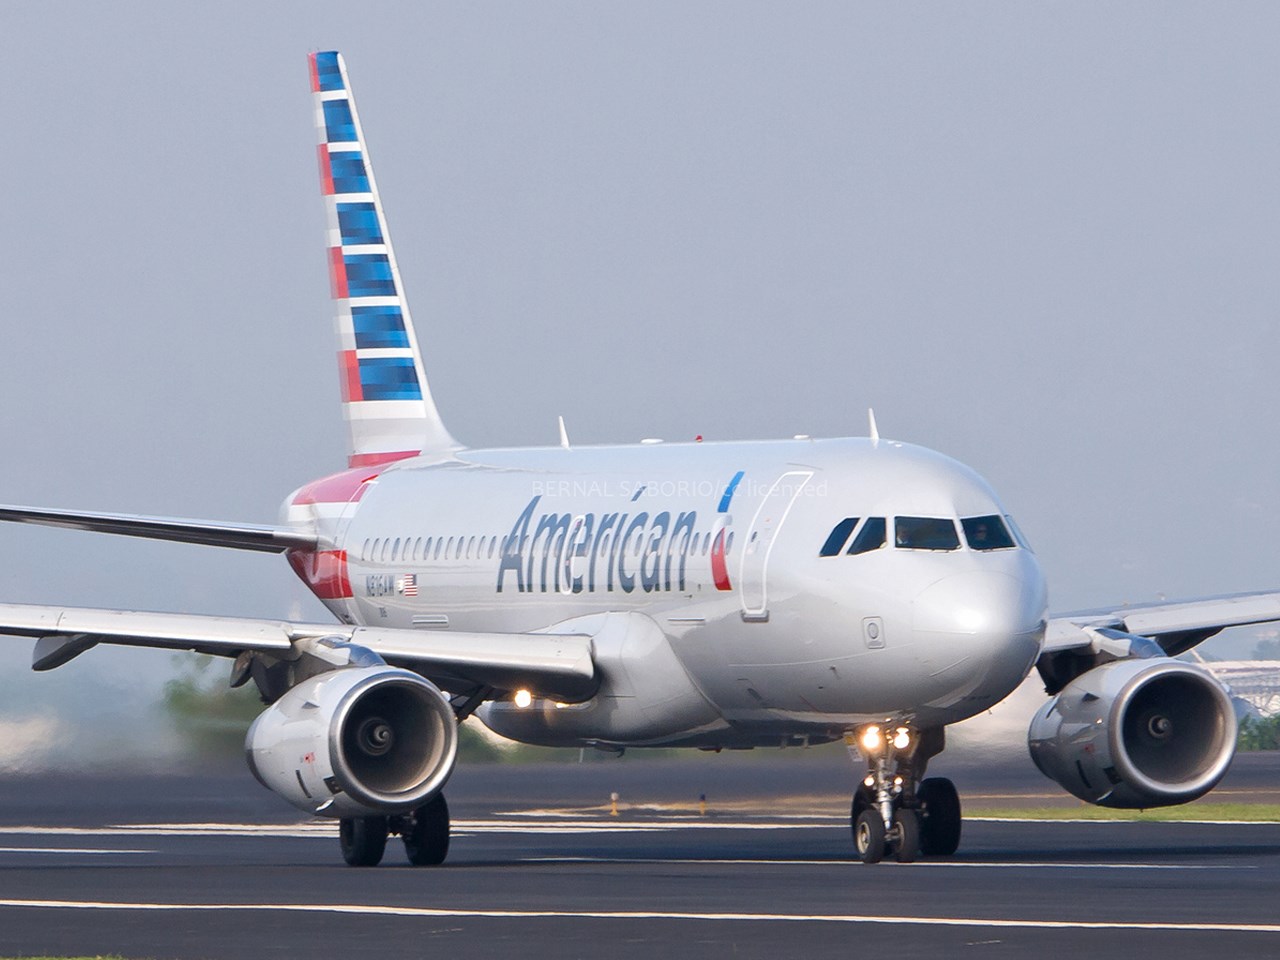 American Airlines Welcomes Furry Friends: A Fresh Take on Flying with Pets